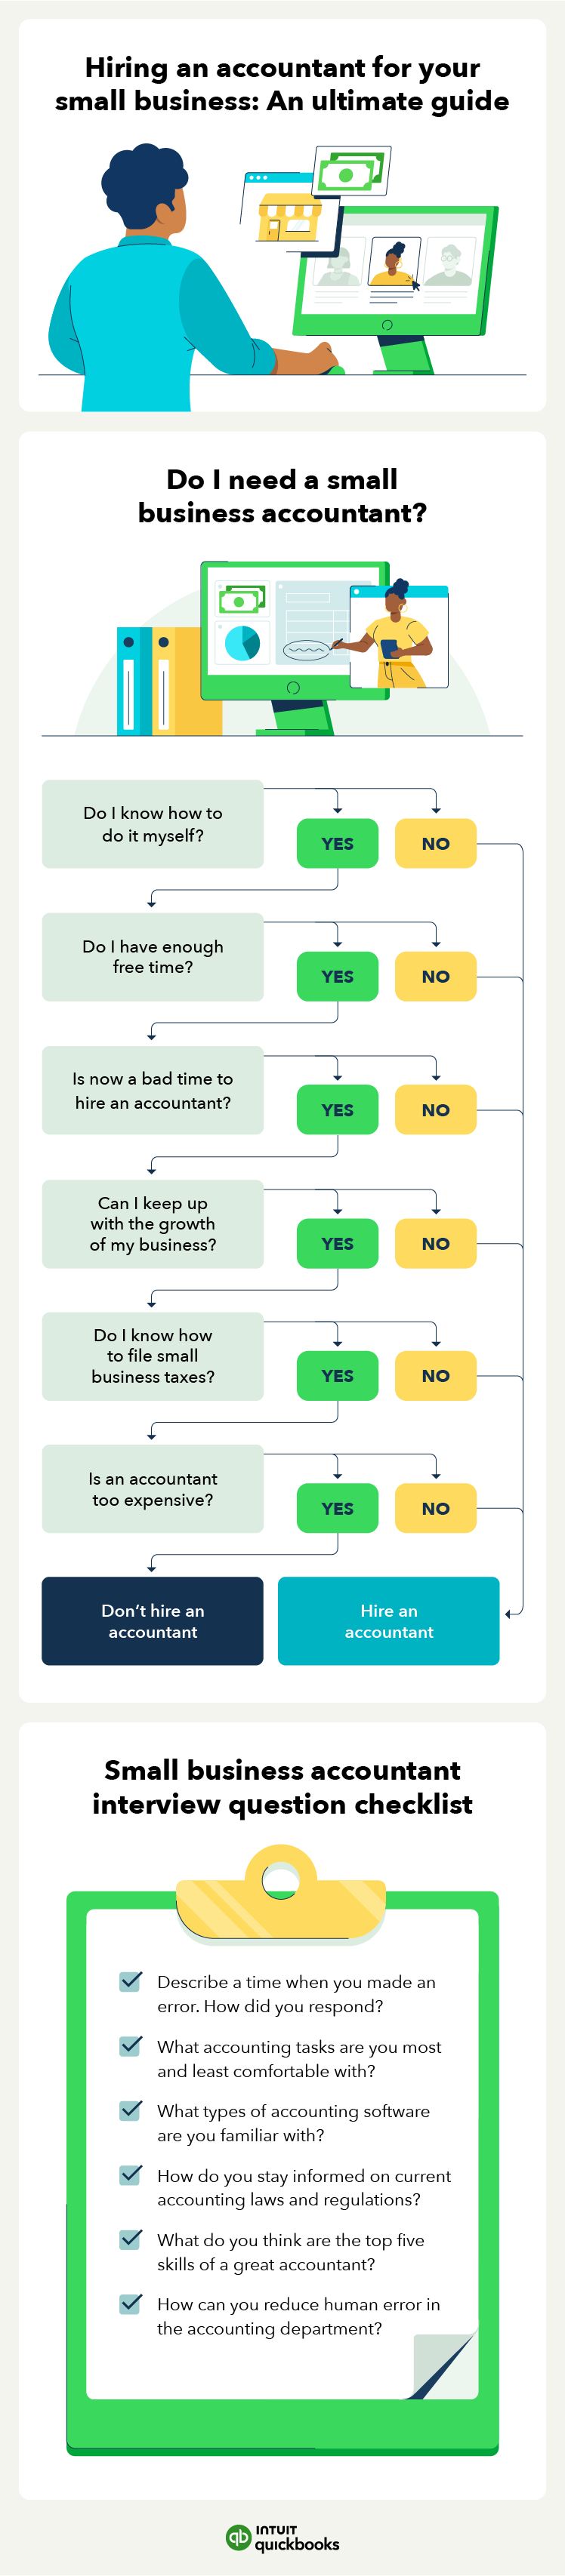 An infographic includes information relating to hiring an accountant for a small business, from how to decide to interview questions you can use.